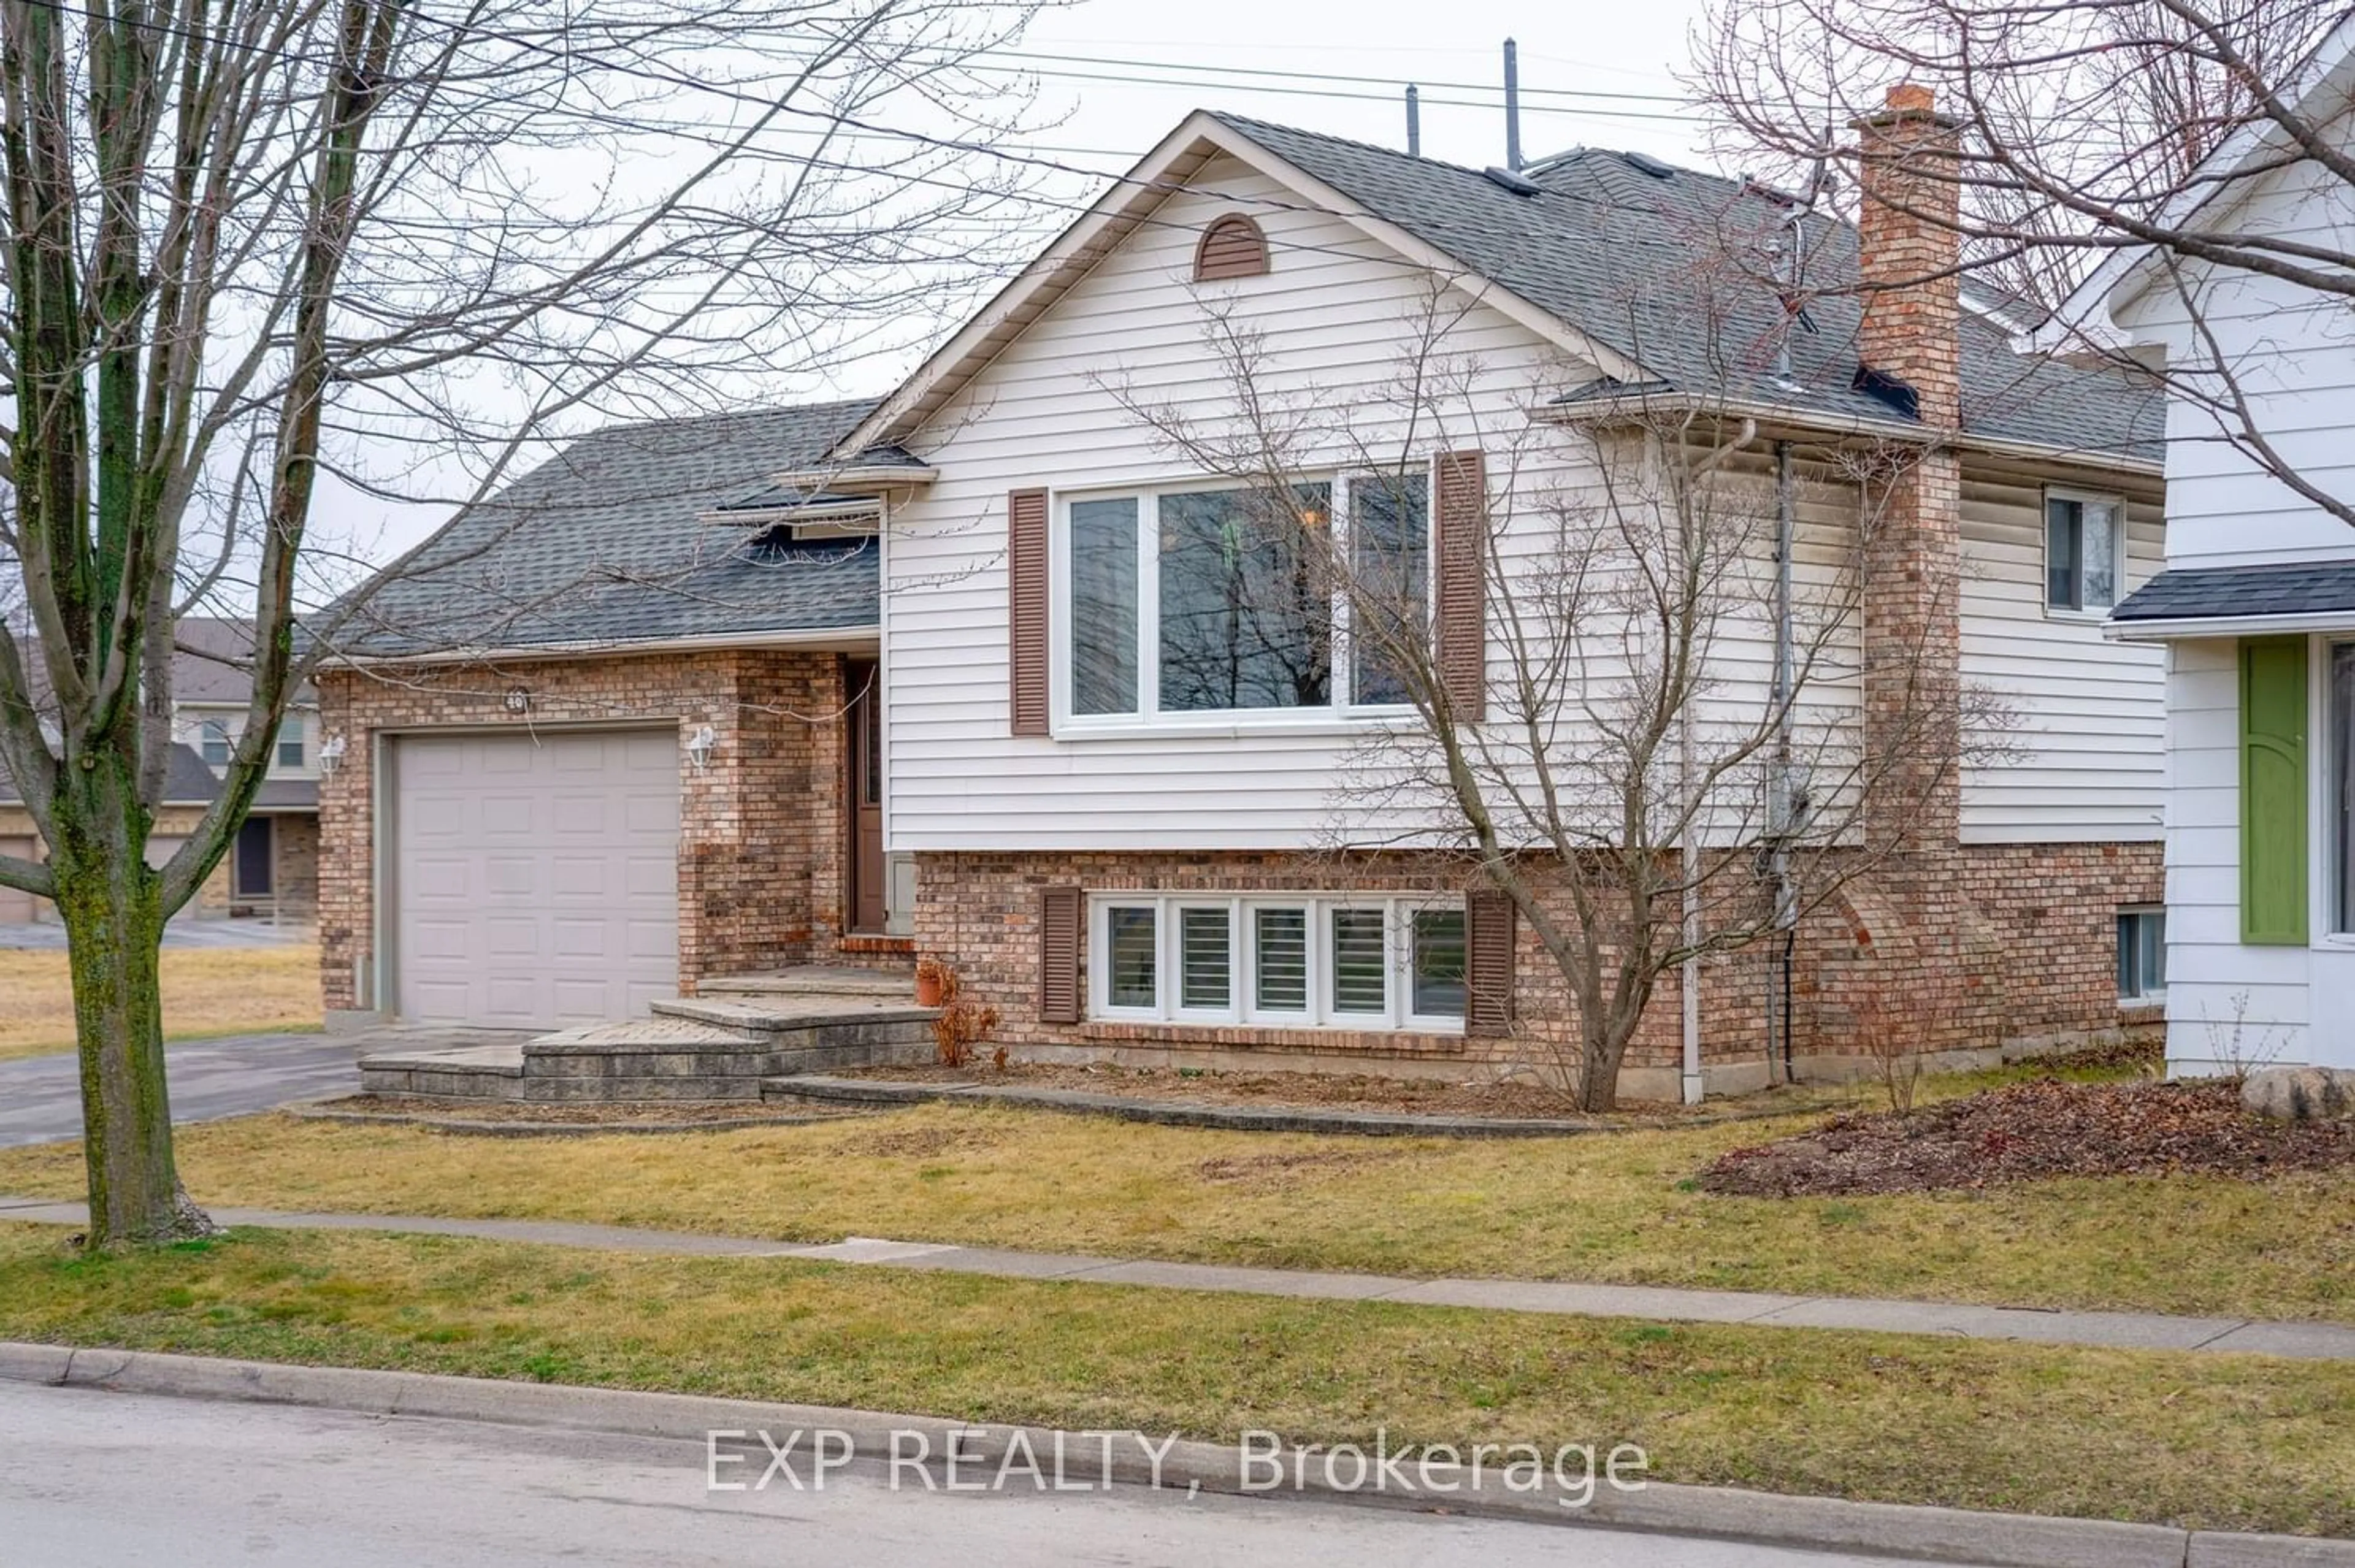 Frontside or backside of a home for 46 Grapeview Dr, St. Catharines Ontario L2R 6P9